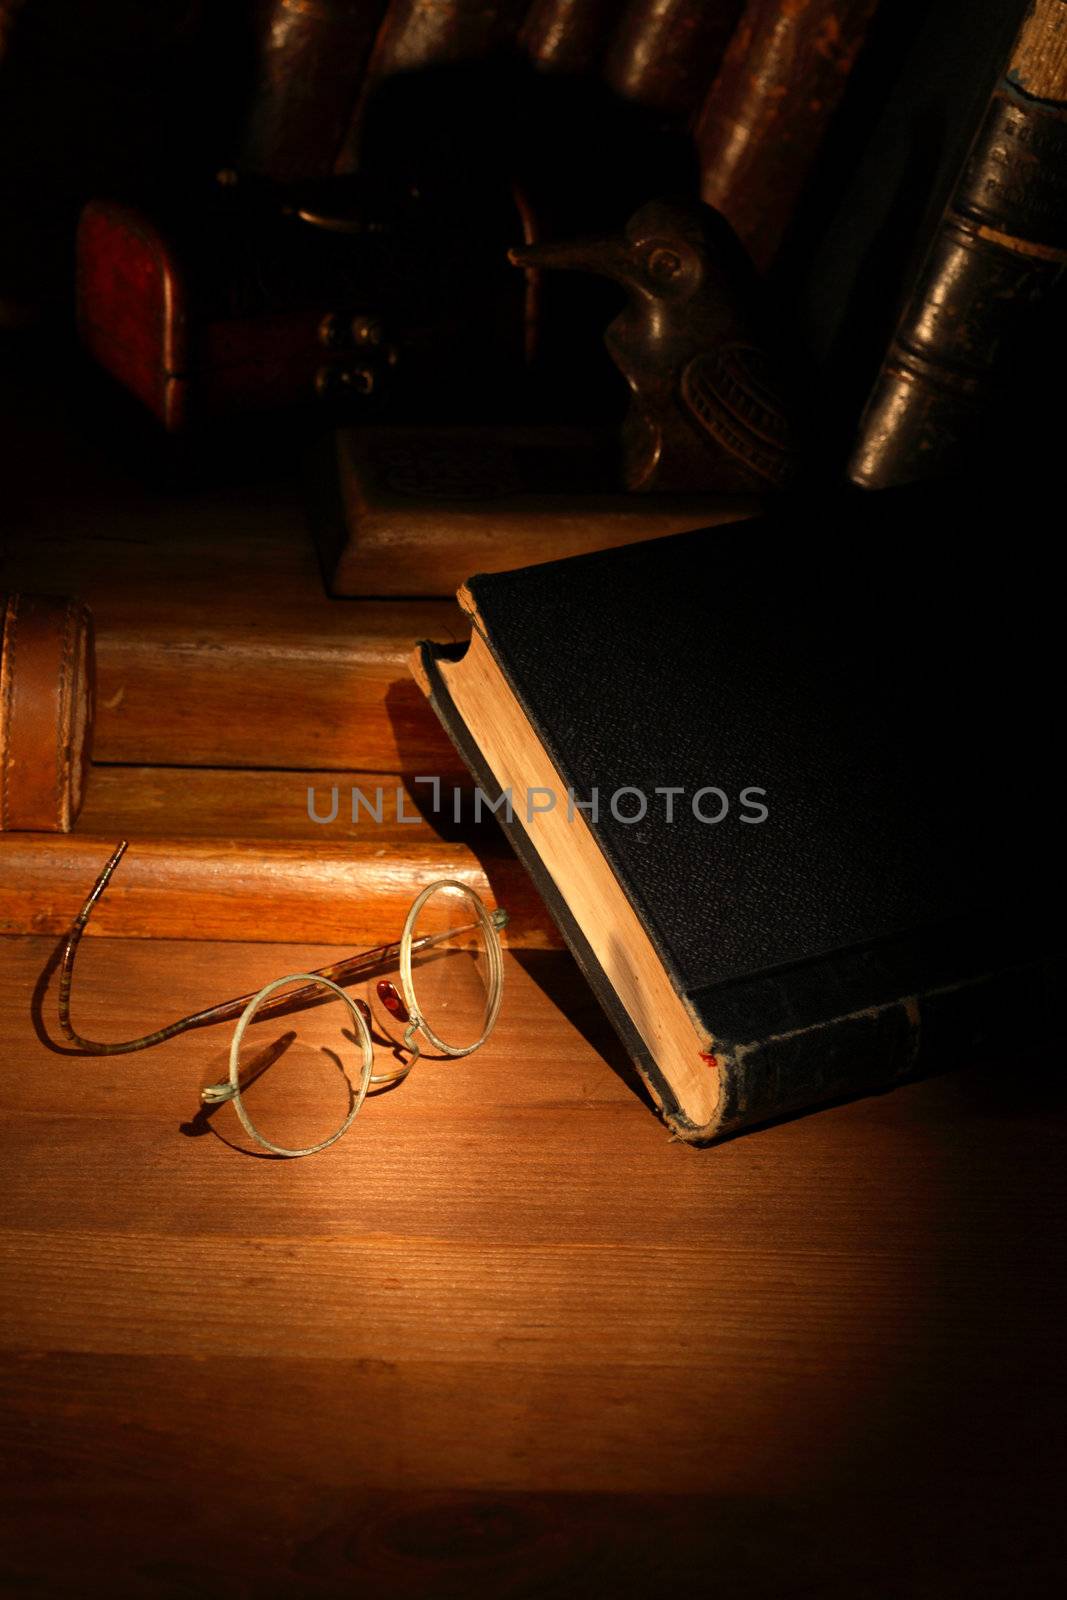 Vintage still life with old spectacles near book on wooden surface